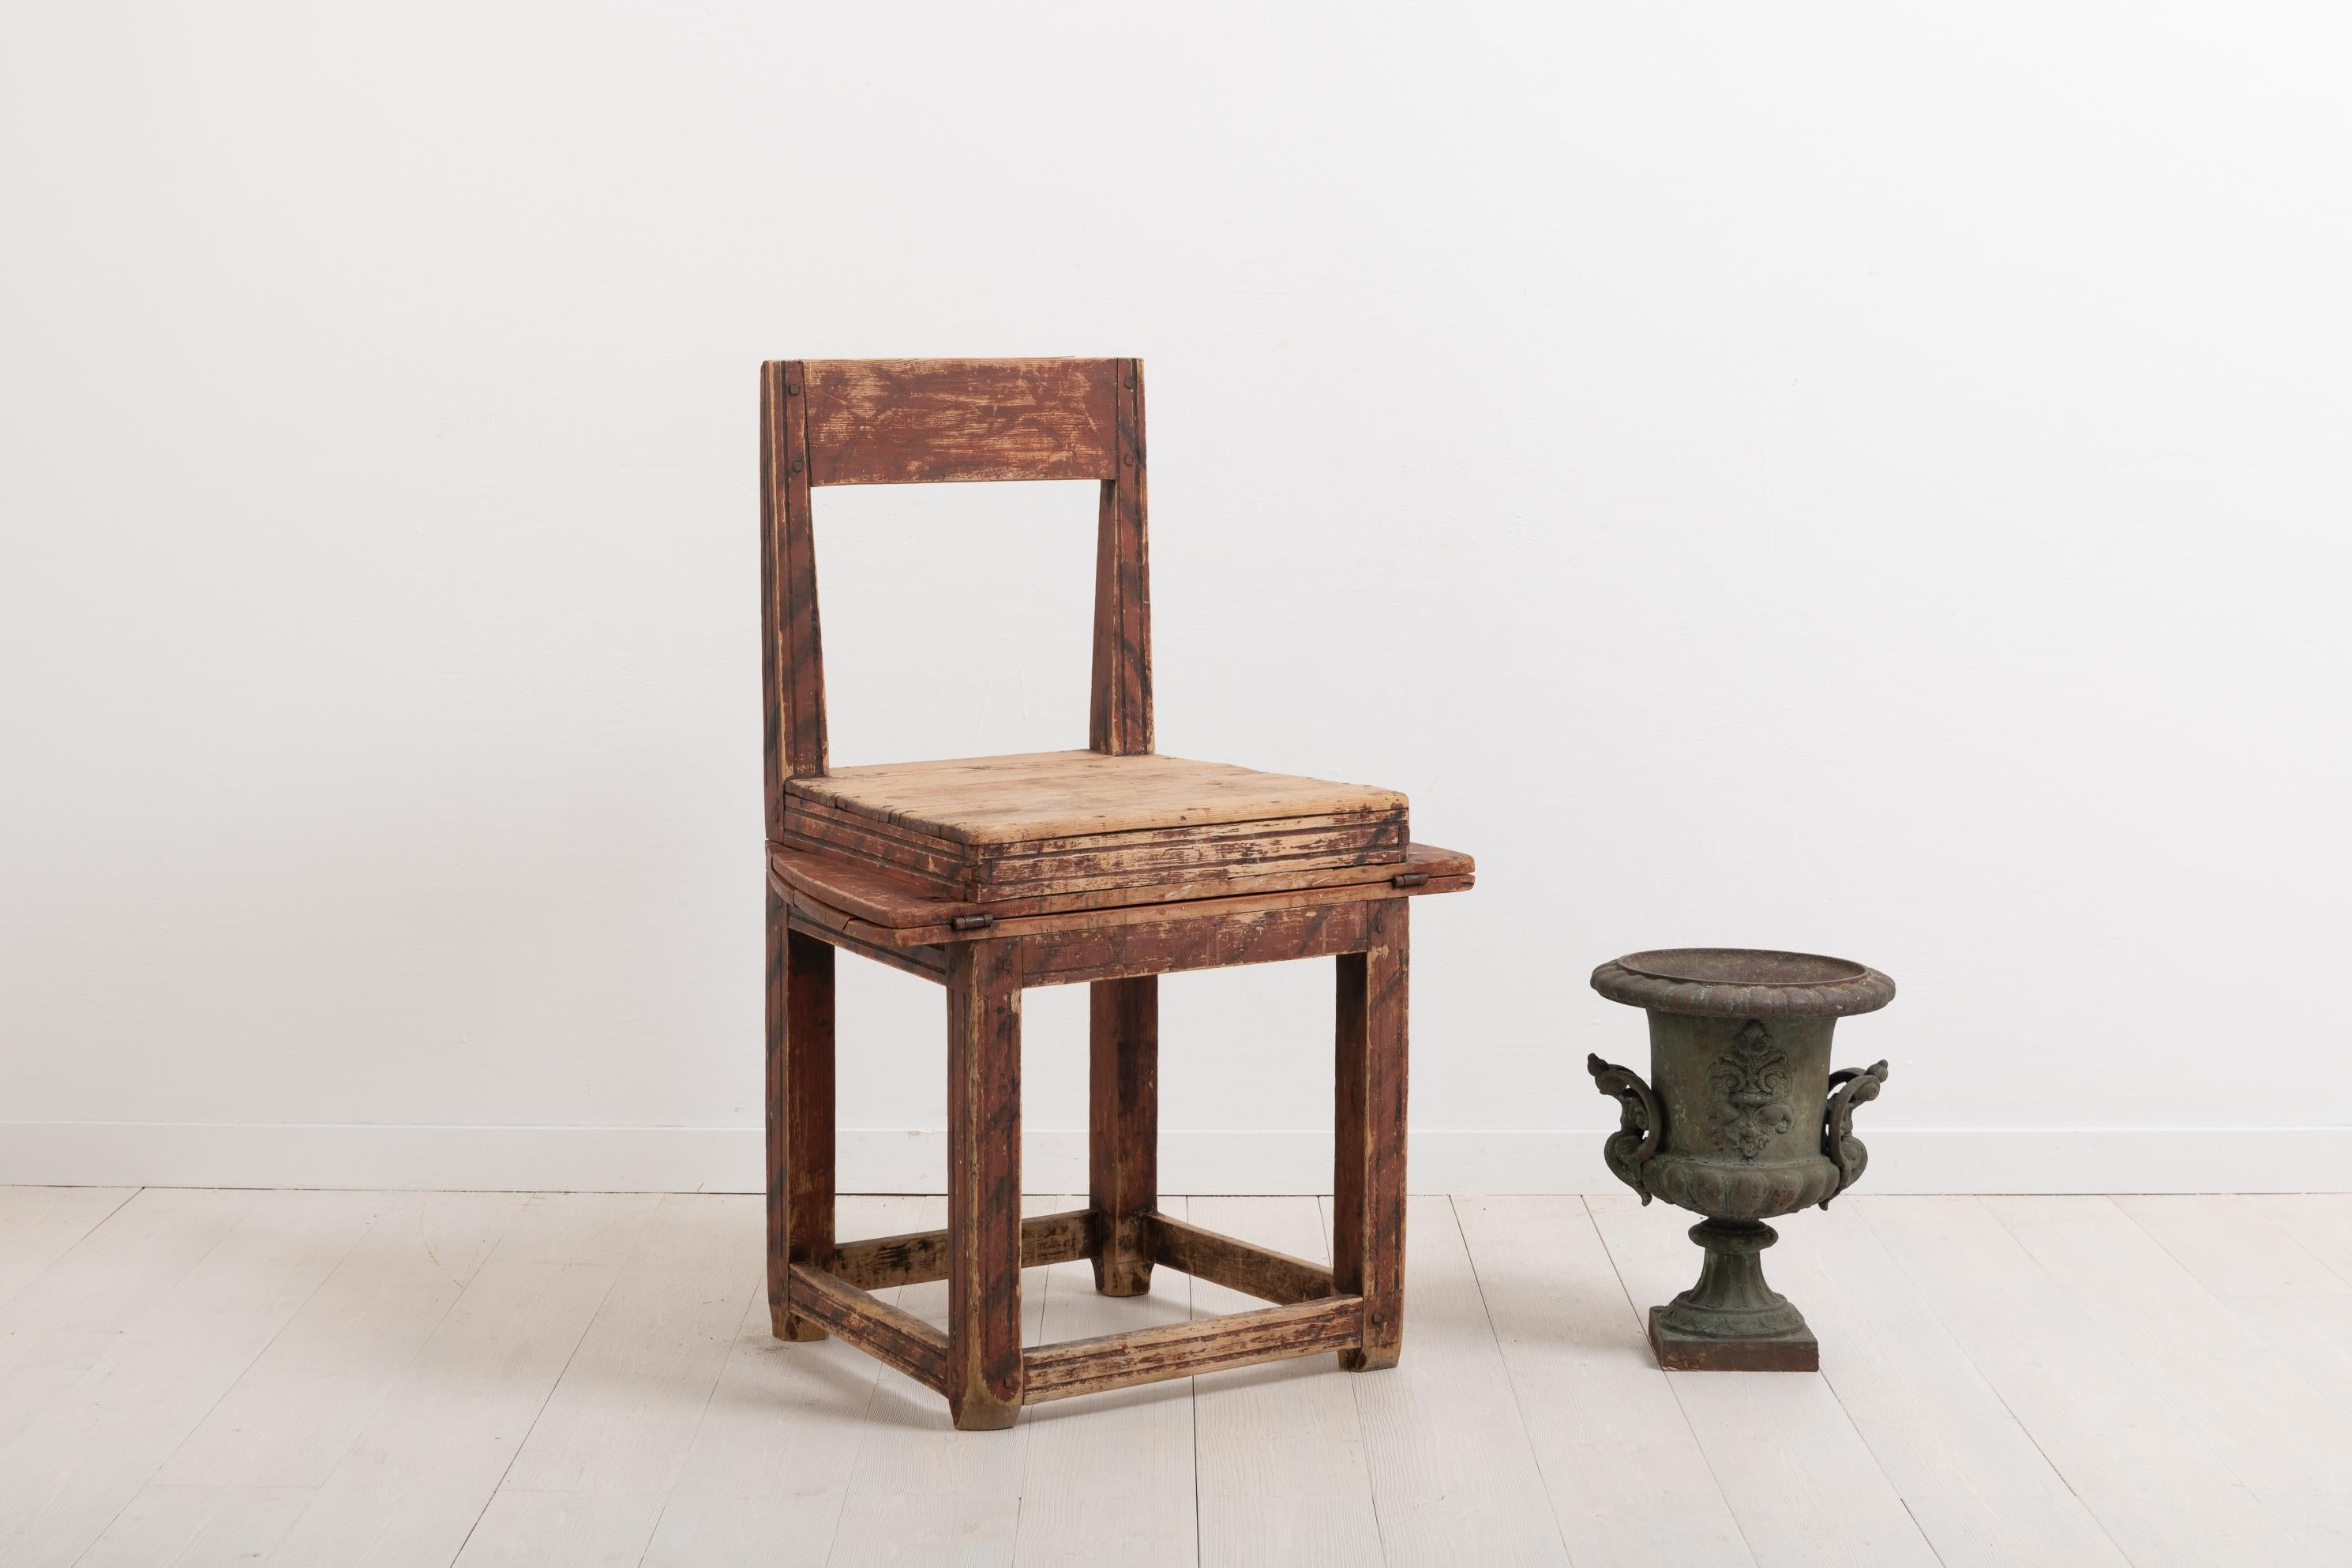 Primitive combined chair and table. This folk art combination furniture is a good example of 19th century compact living. The goal was to fit as many uses into the same item or a limited space, such as this combined chair and table. It is in